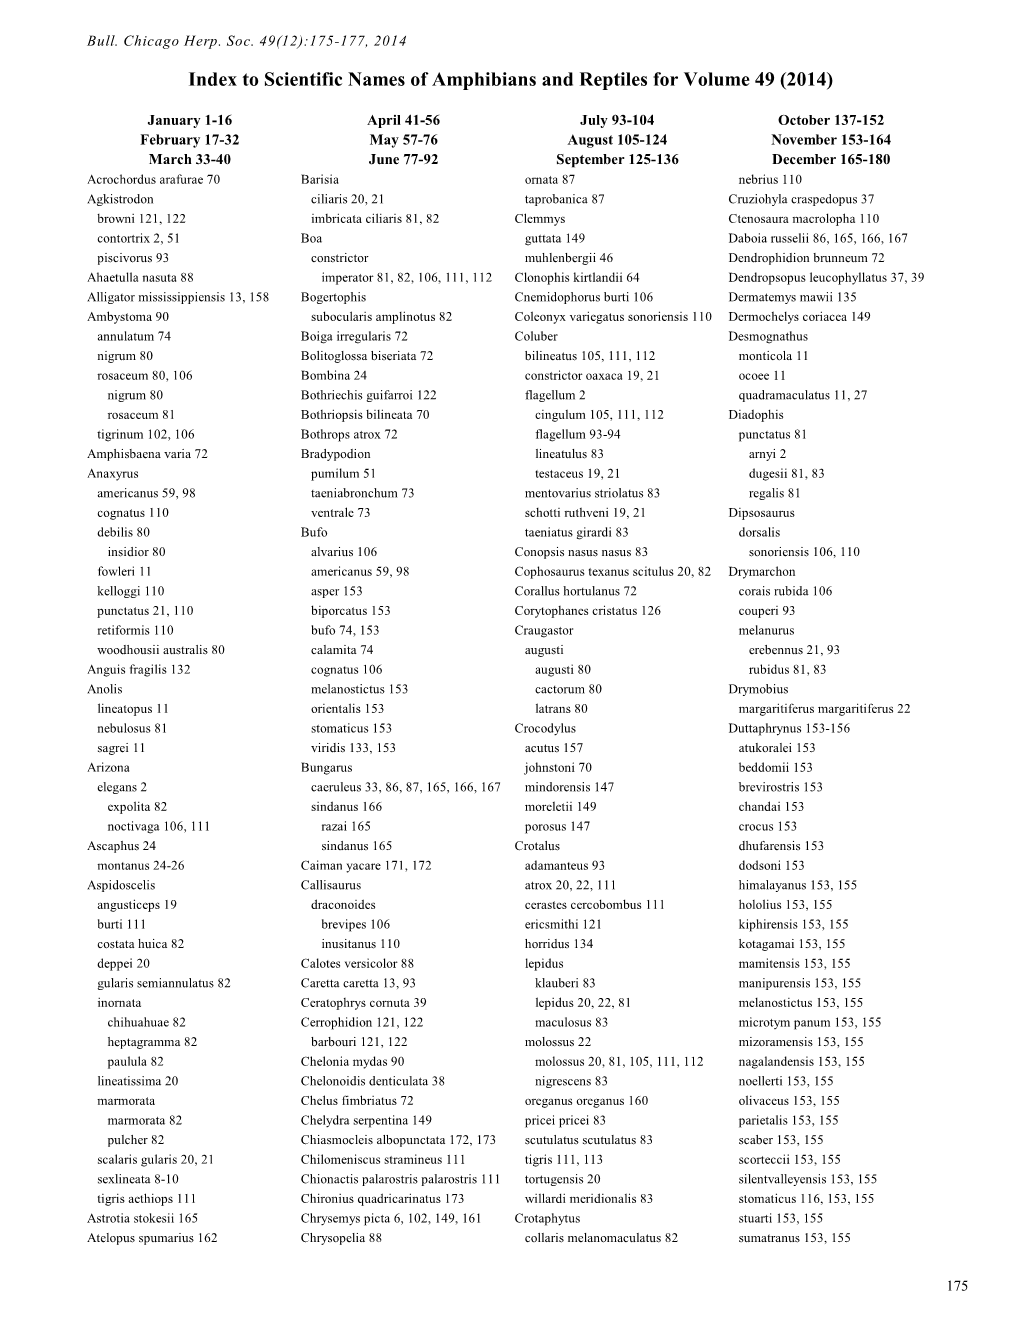 Index to Scientific Names of Amphibians and Reptiles for Volume 49 (2014)